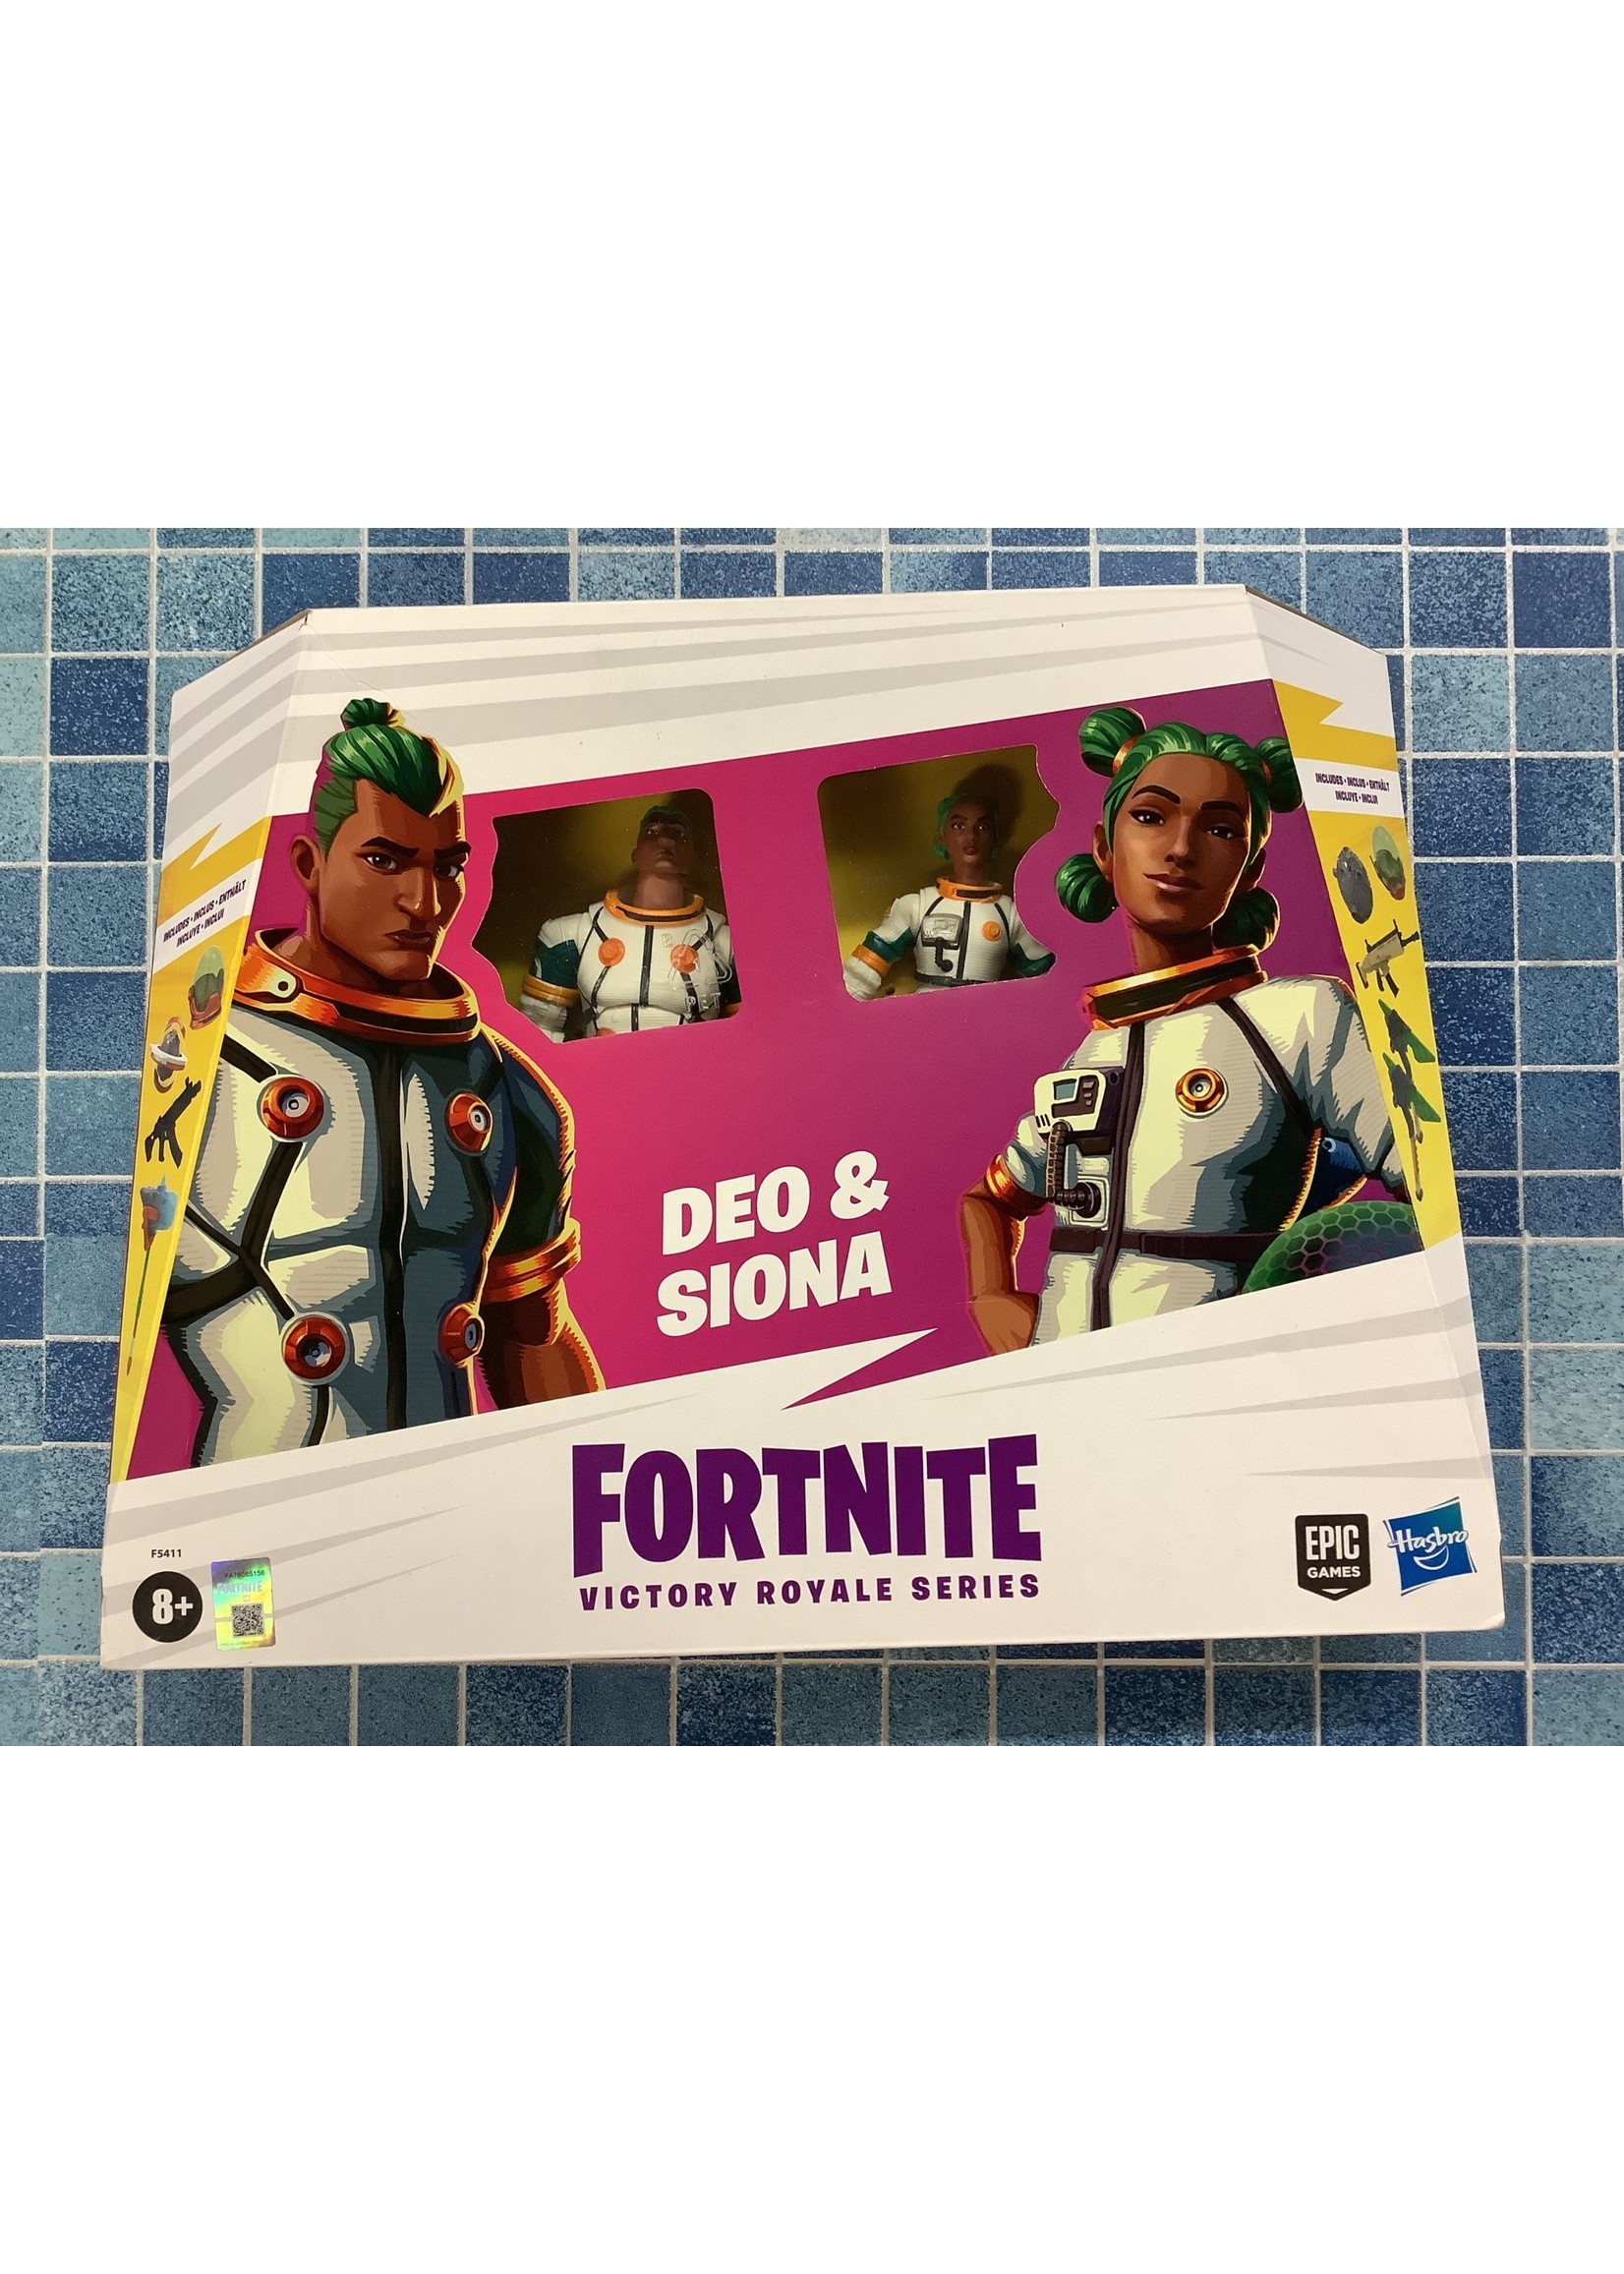 Hasbro Fortnite Victory Royale Series Deo and Siona Battle Royale Pack